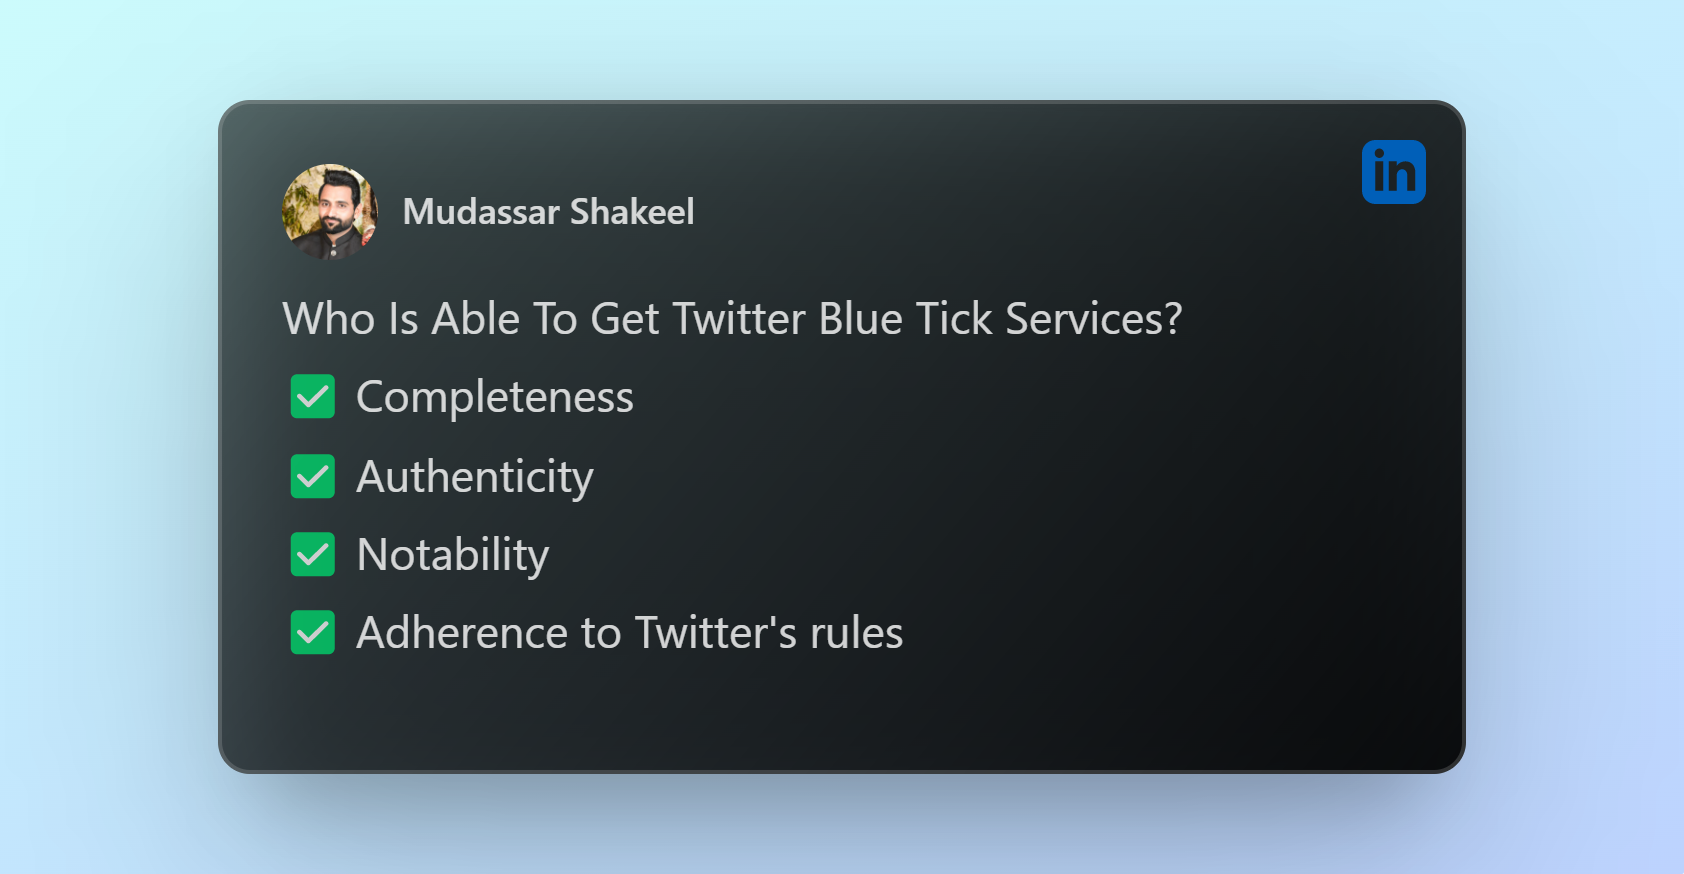 Who-is-able-to-get-twitter-blue-tick-services